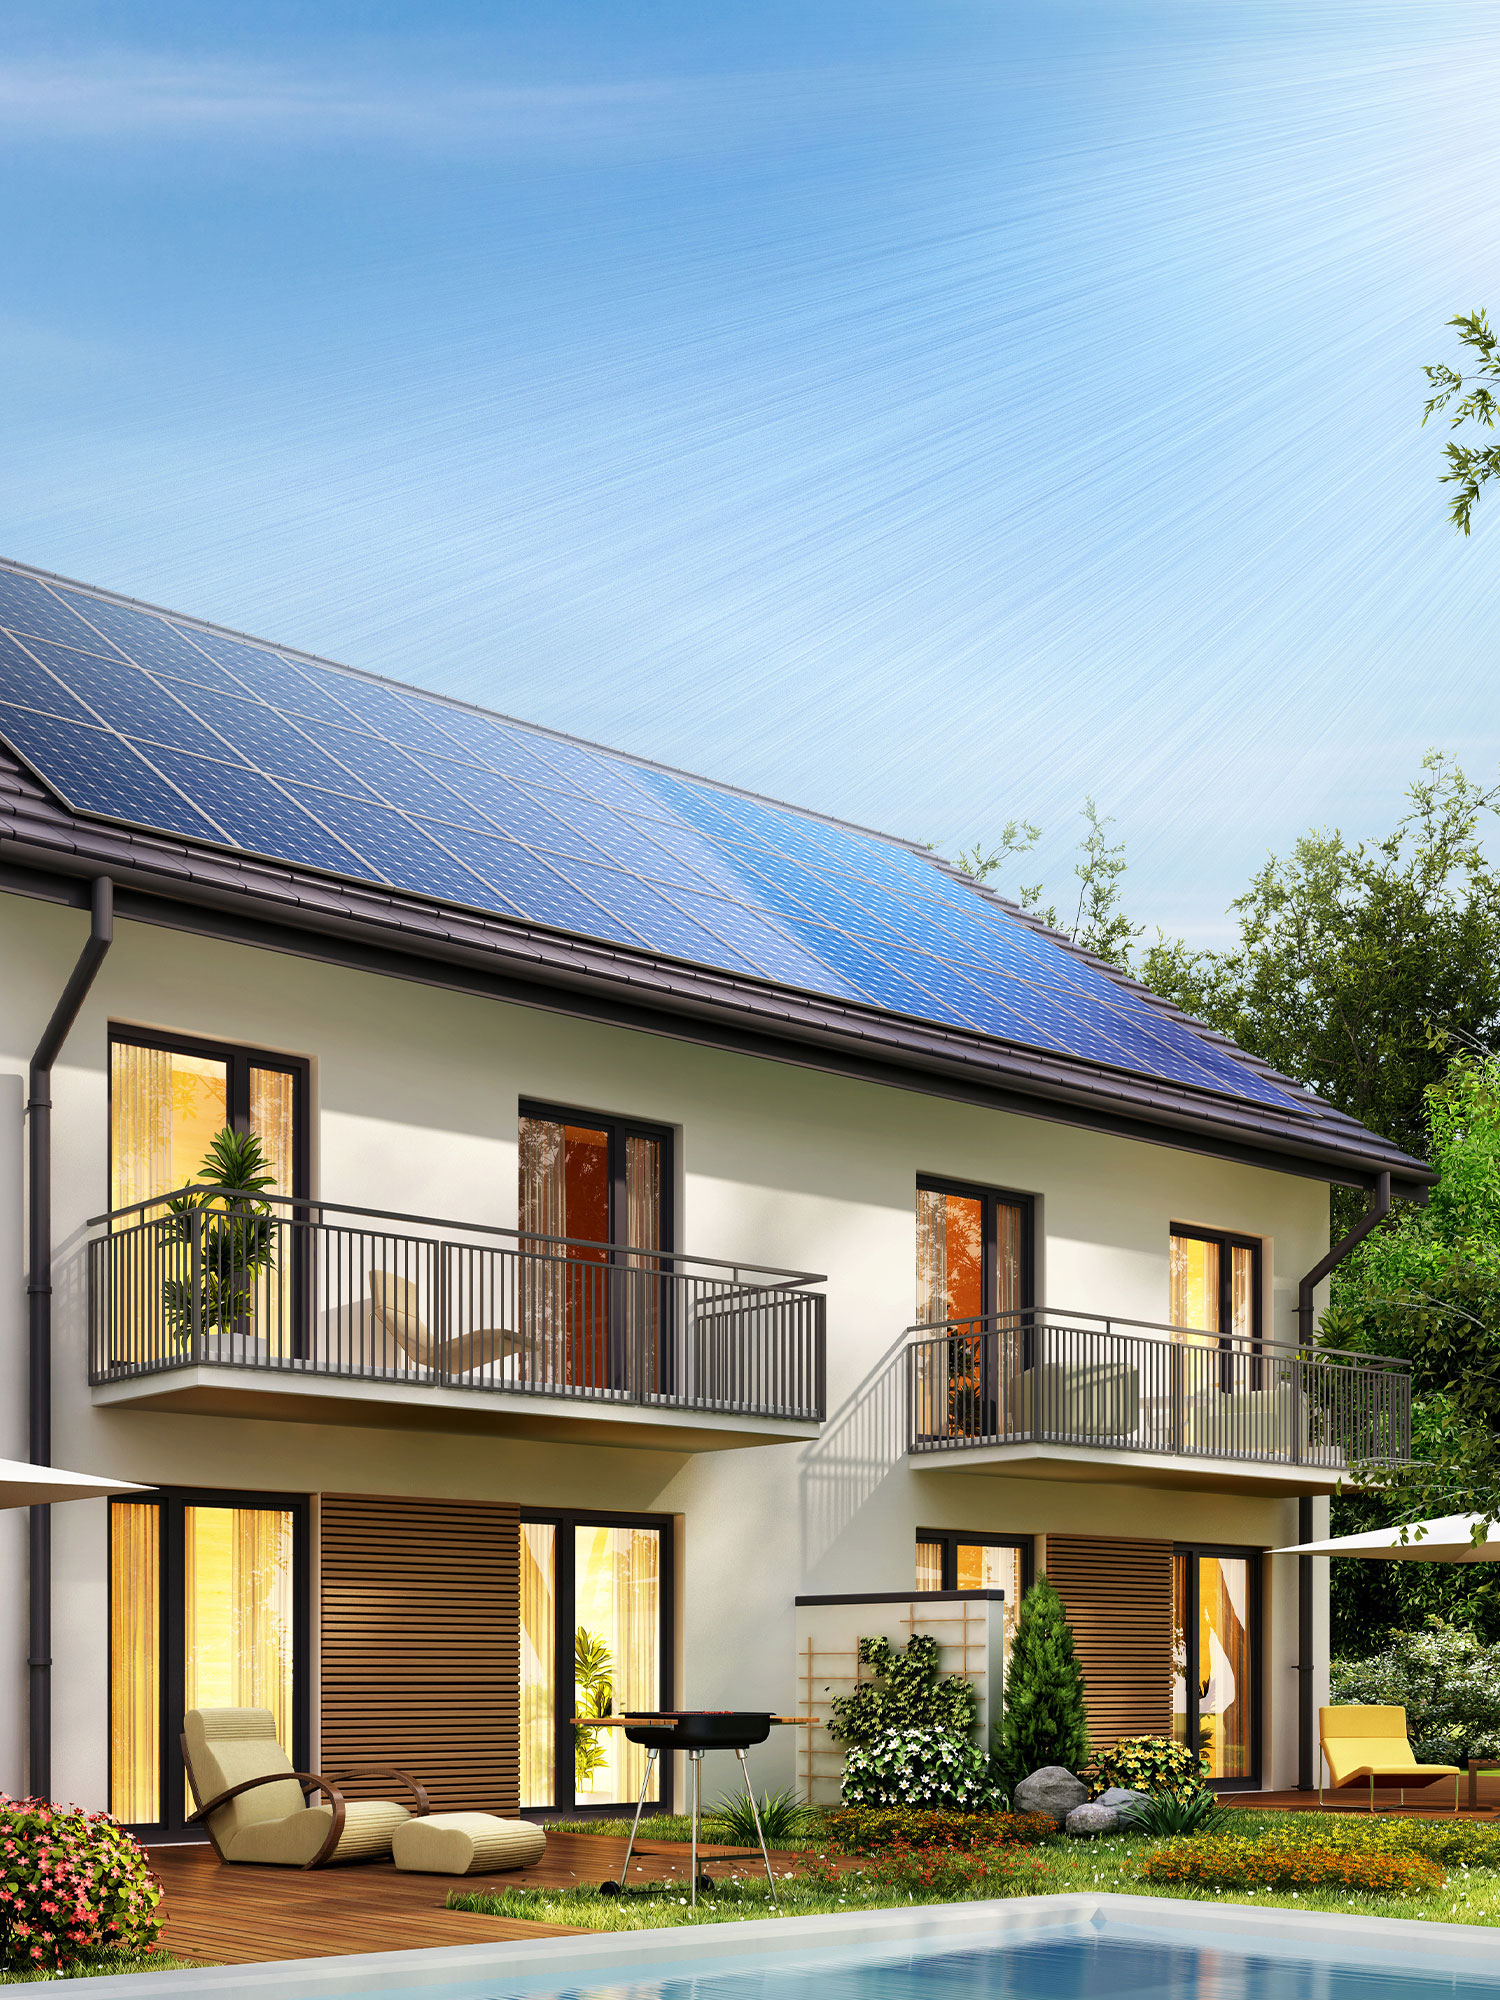 Energy independence for home in Park City is easy with SunPower by Custom Energy.